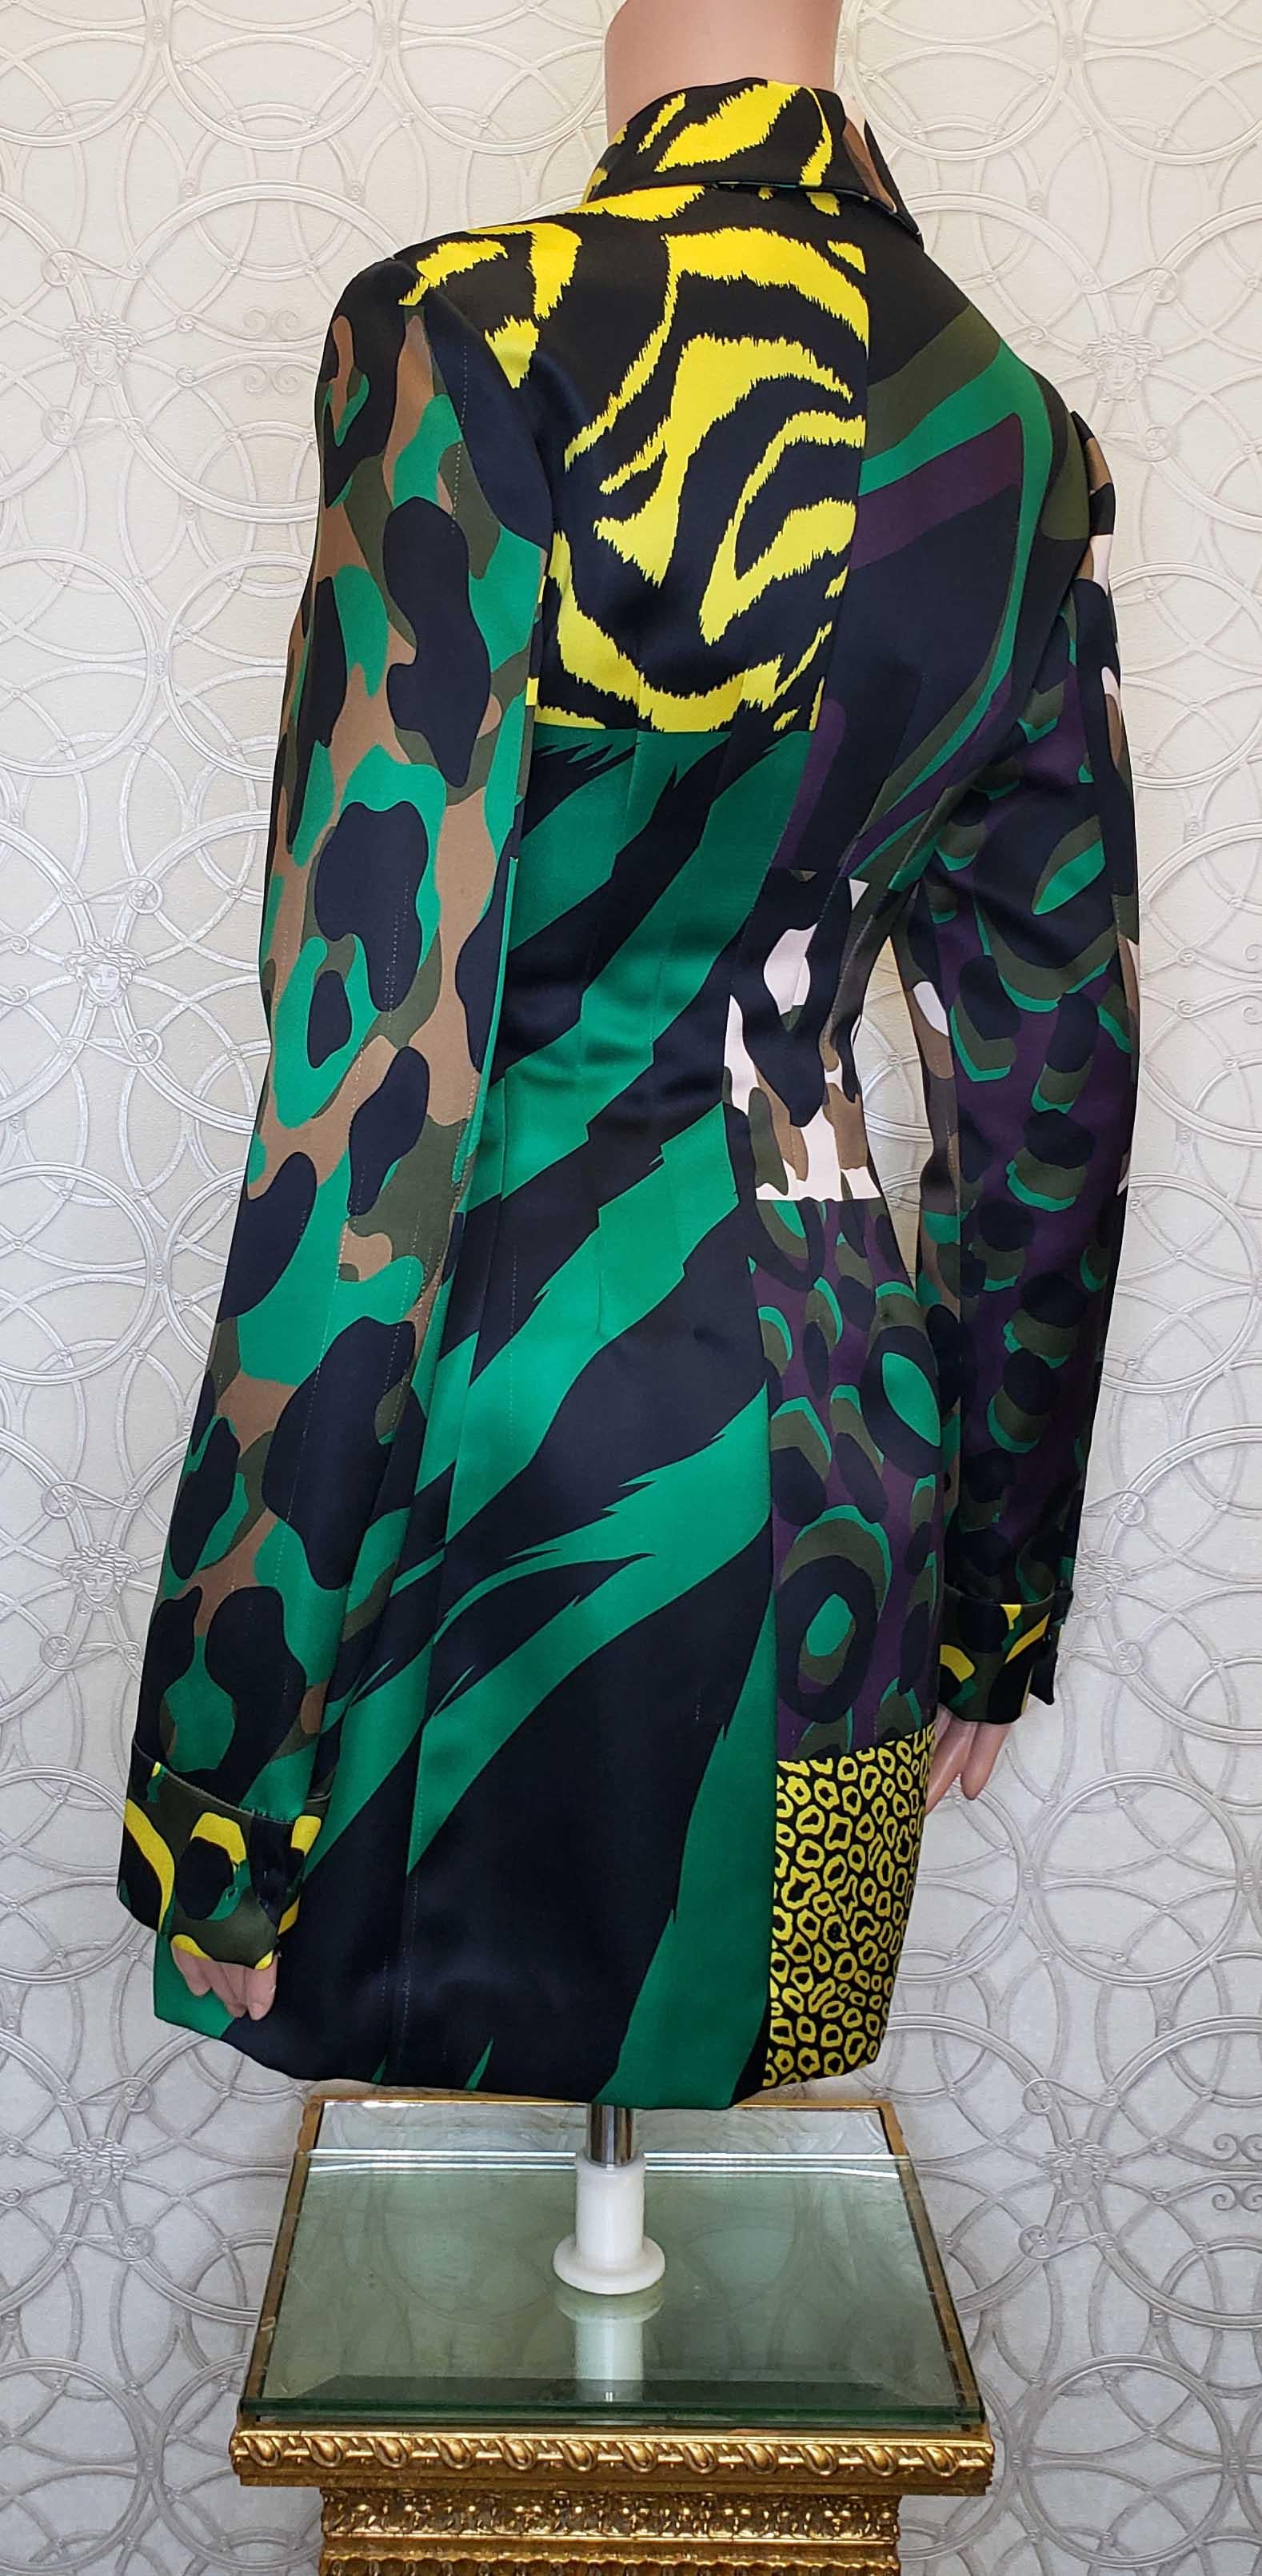 S/S 2016 L # 31 NEW VERSACE MULTI COLOR MILITARY Coat 38 - 2 For Sale 2